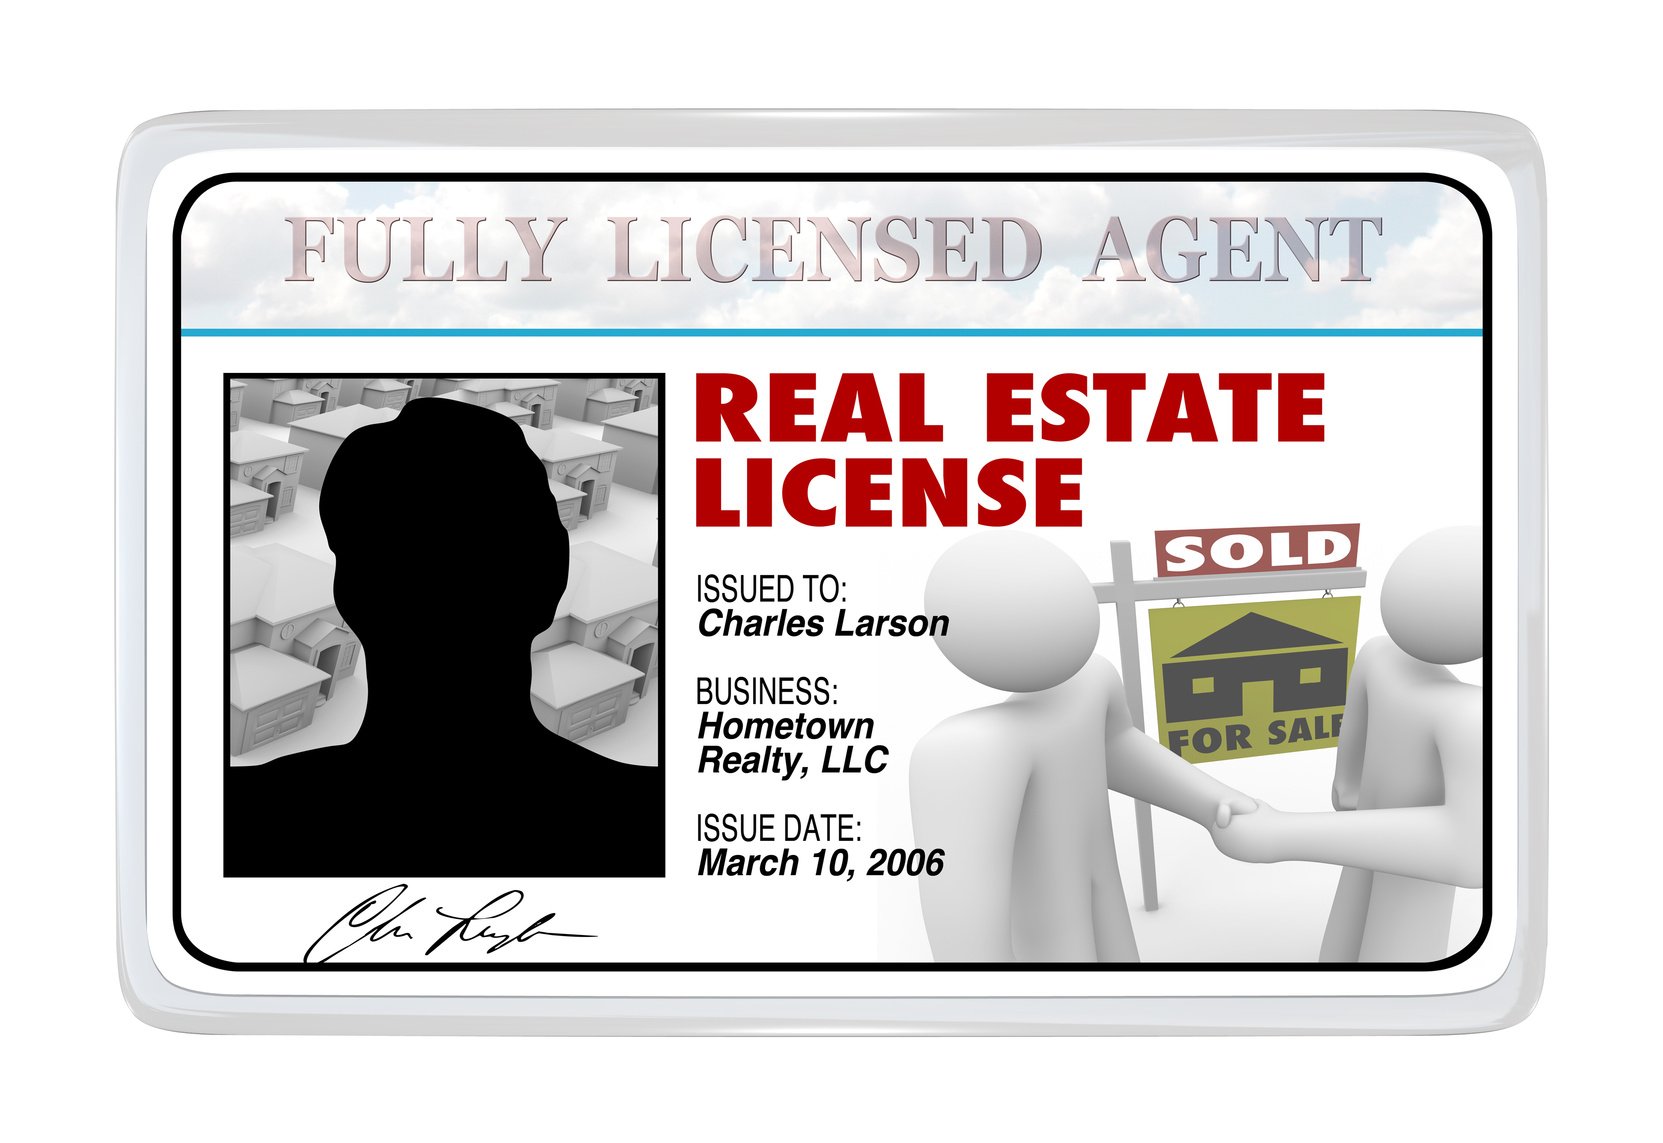 A laminated identification I.D. card or for a real estate license that a buying or selling professional would use to prove his credentials and certification to do business